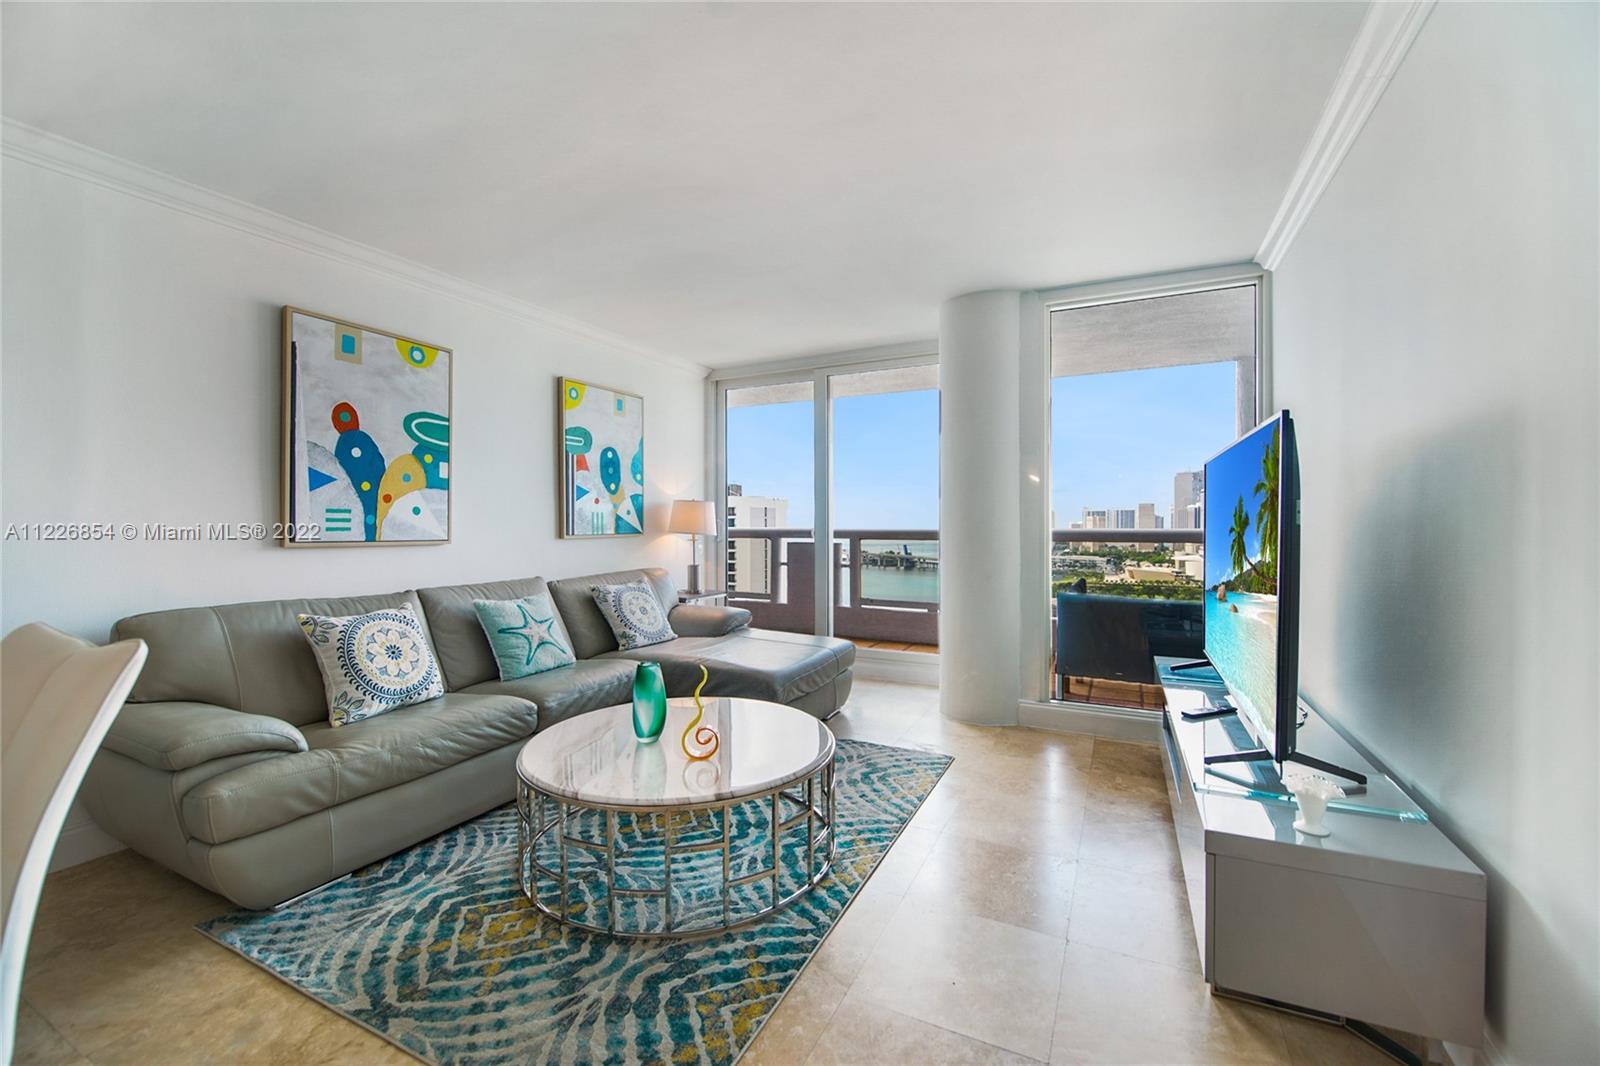 Enjoy stunning views of the Downtown Miami skyline and Biscayne Bay. This renovated and spacious 1 b